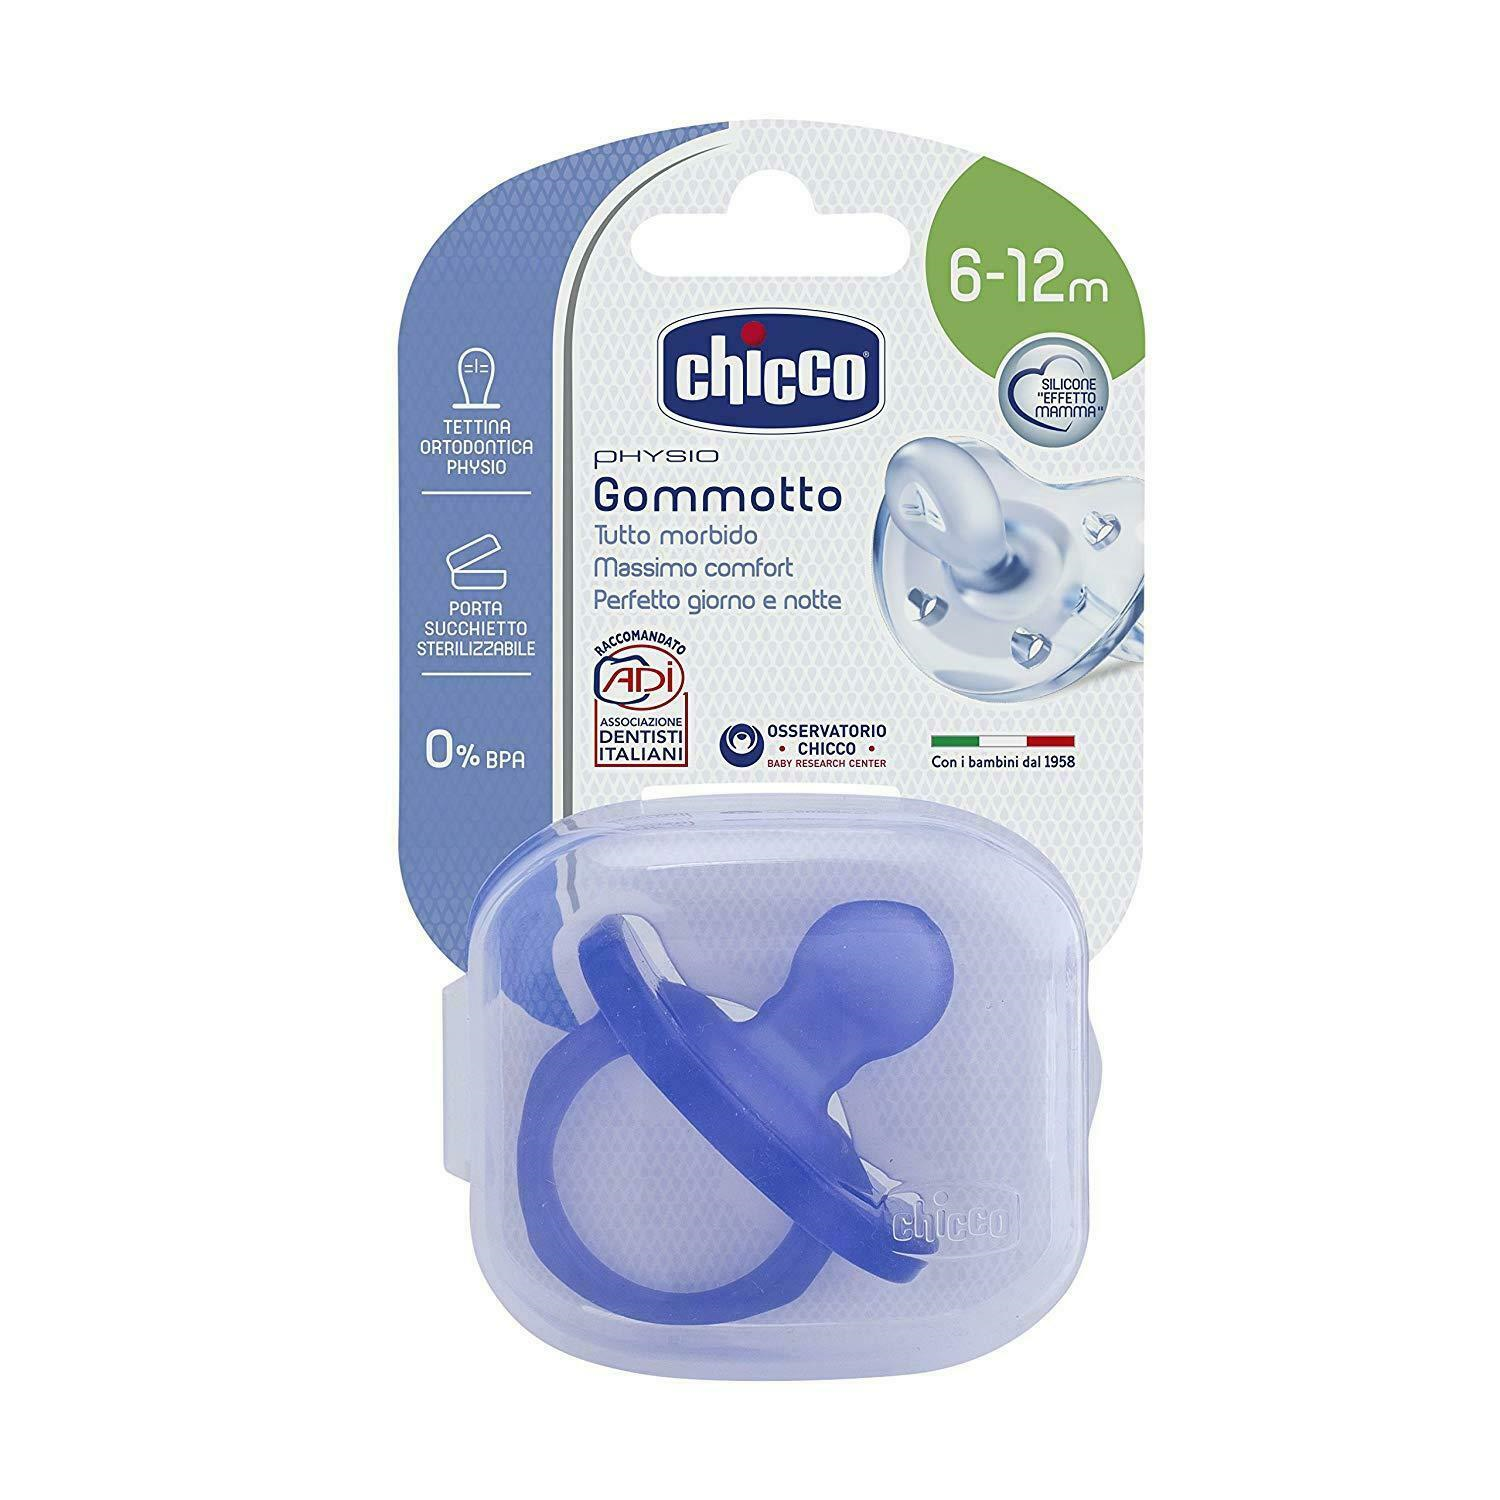 CHICCO PHYSIO SOFT GOMMOTTO 6-12M       